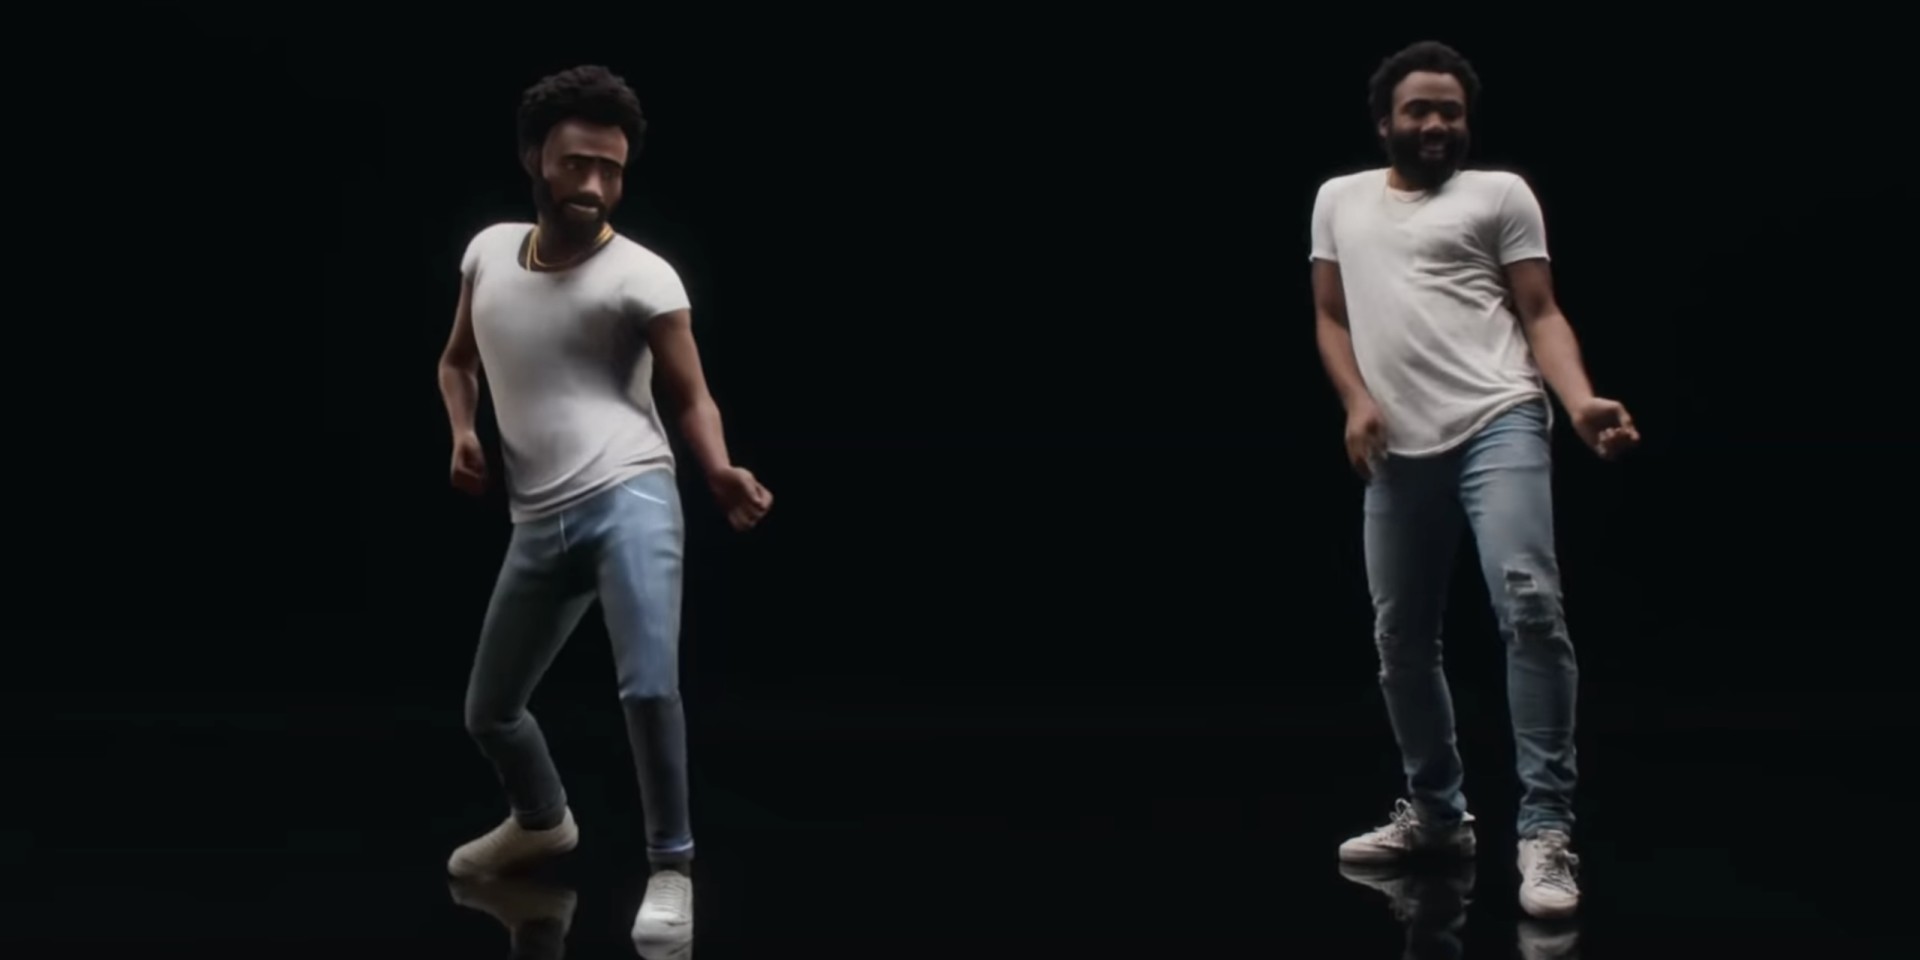 Childish Gambino shares snippet of new song 'Human Sacrifice' in Google Ad